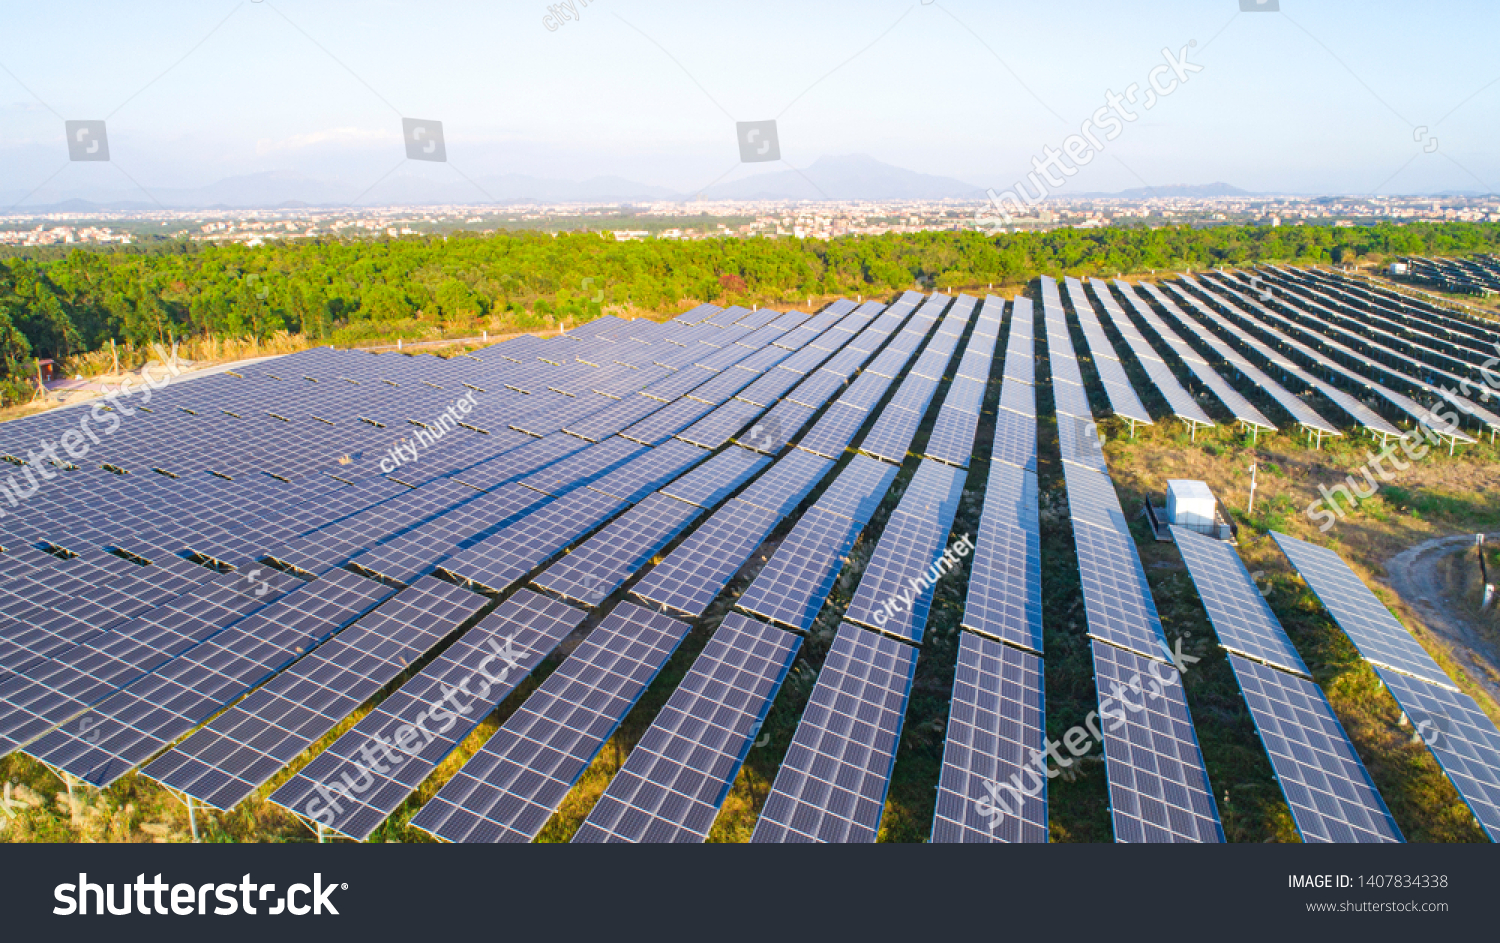 Modern large-scale photovoltaic solar panels. #1407834338